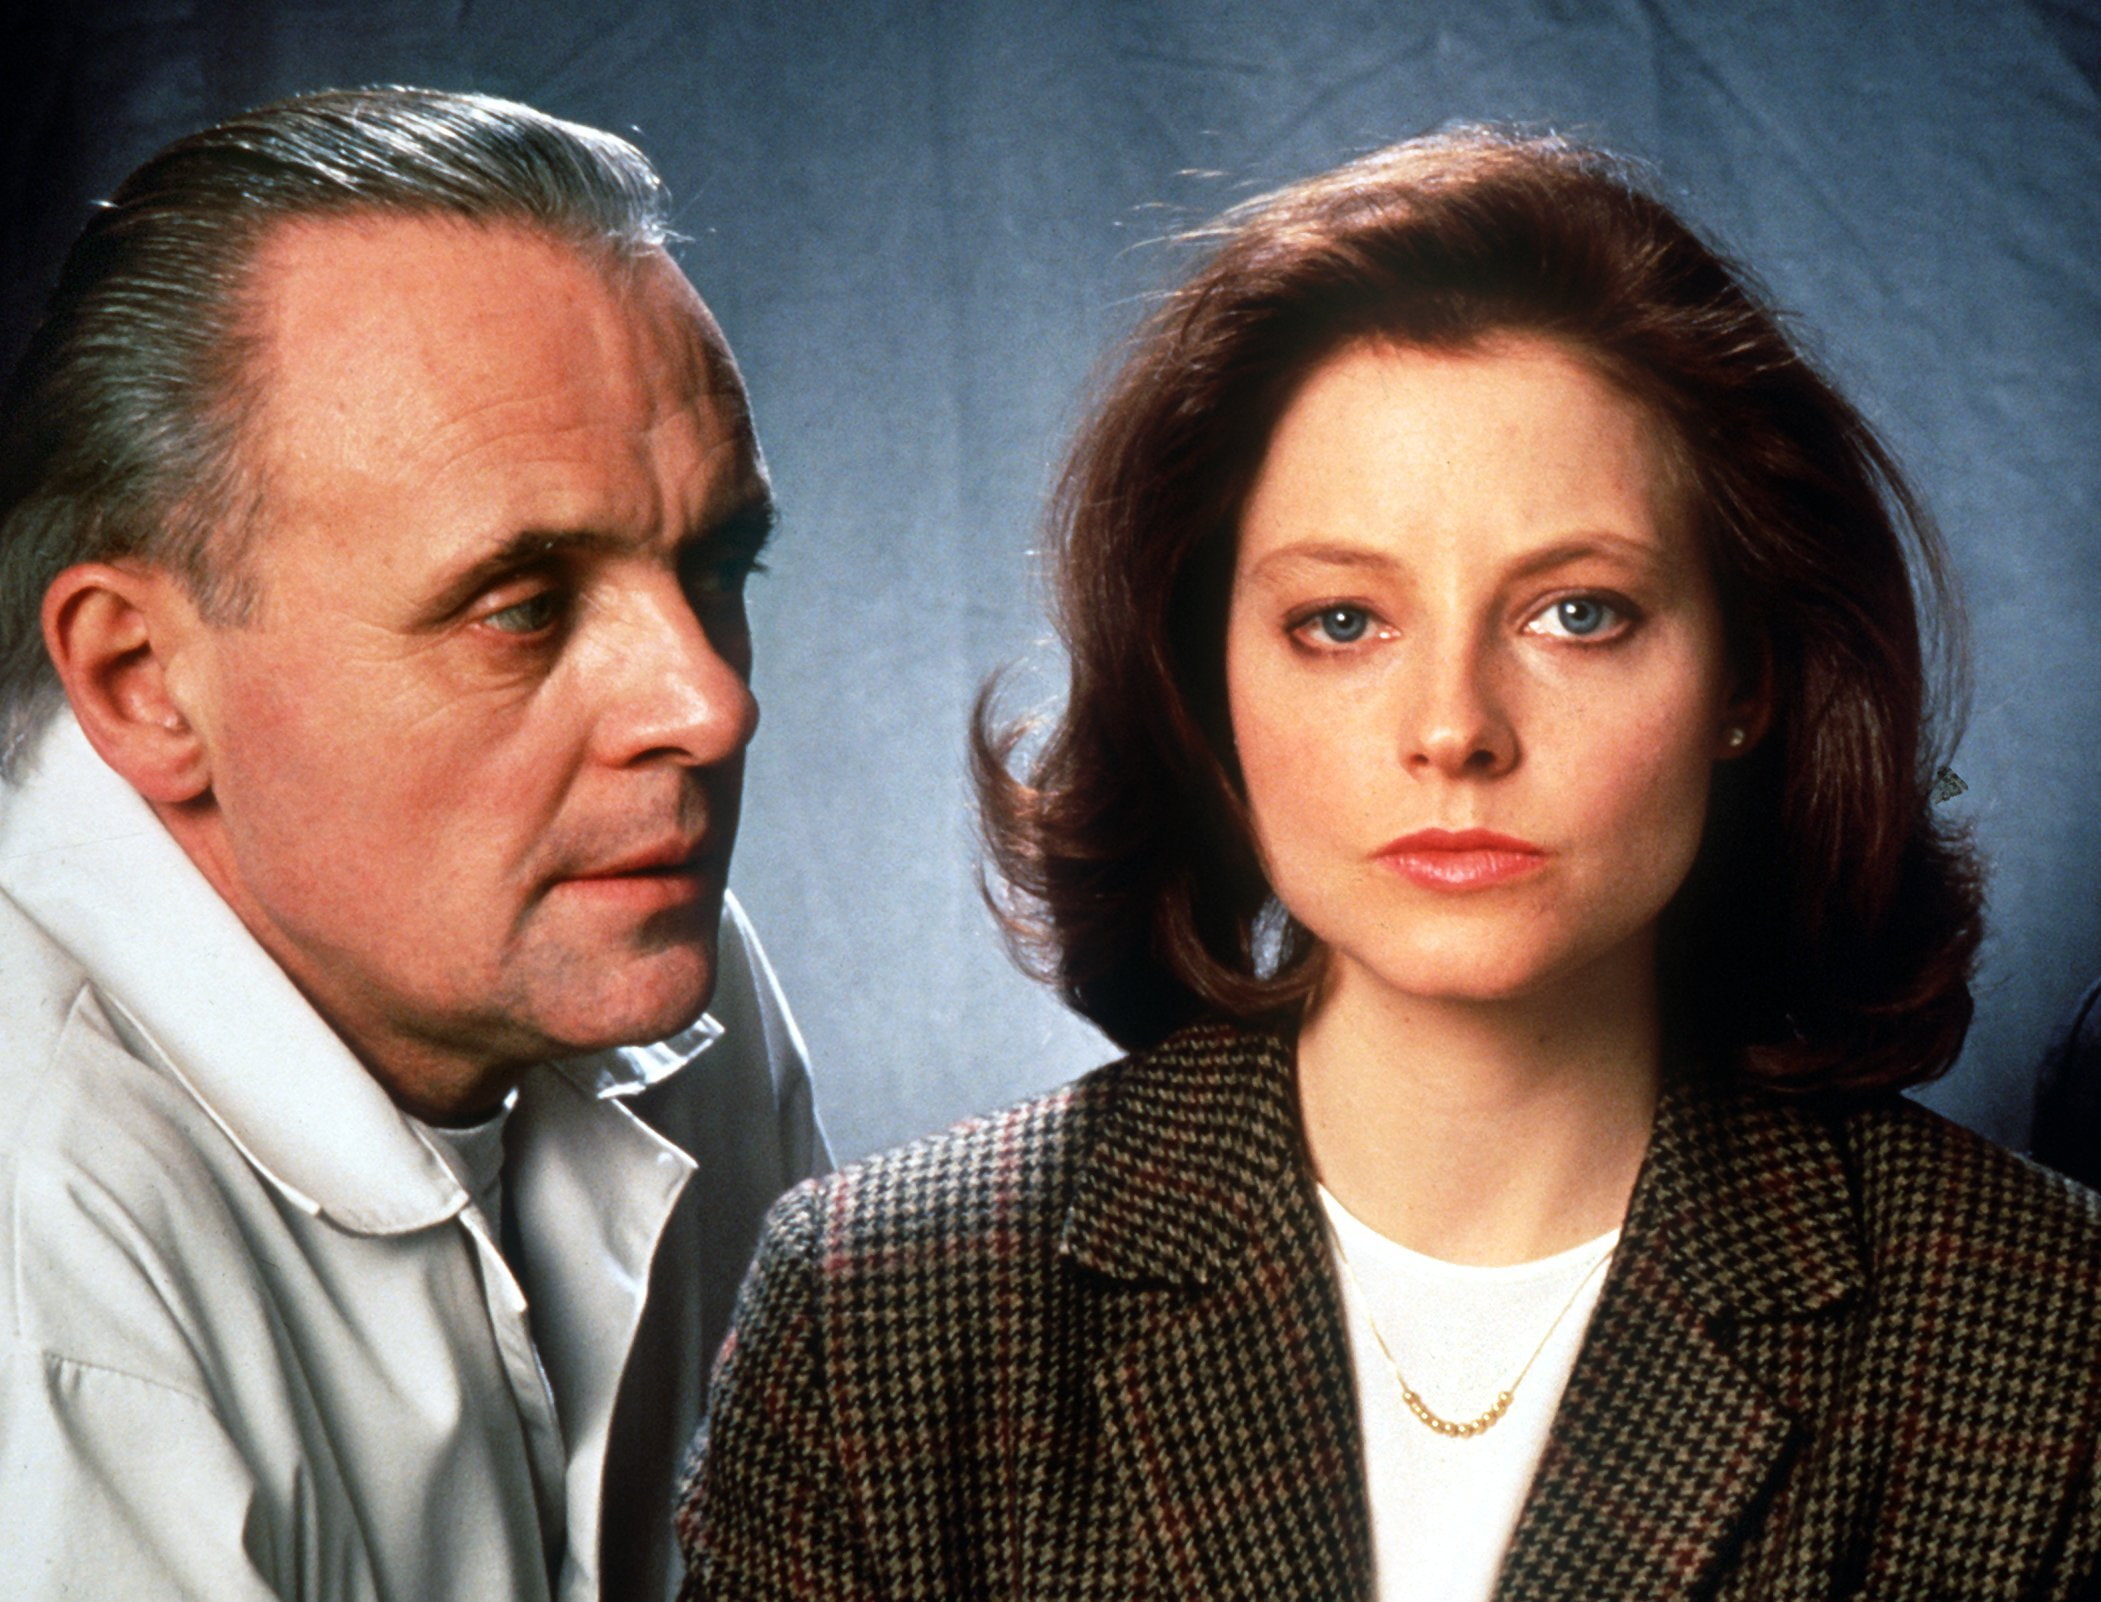 Crime, Drama, Hannibal, Lambs, Silence, The, Thriller - Jodie Foster Y Anthony Hopkins , HD Wallpaper & Backgrounds